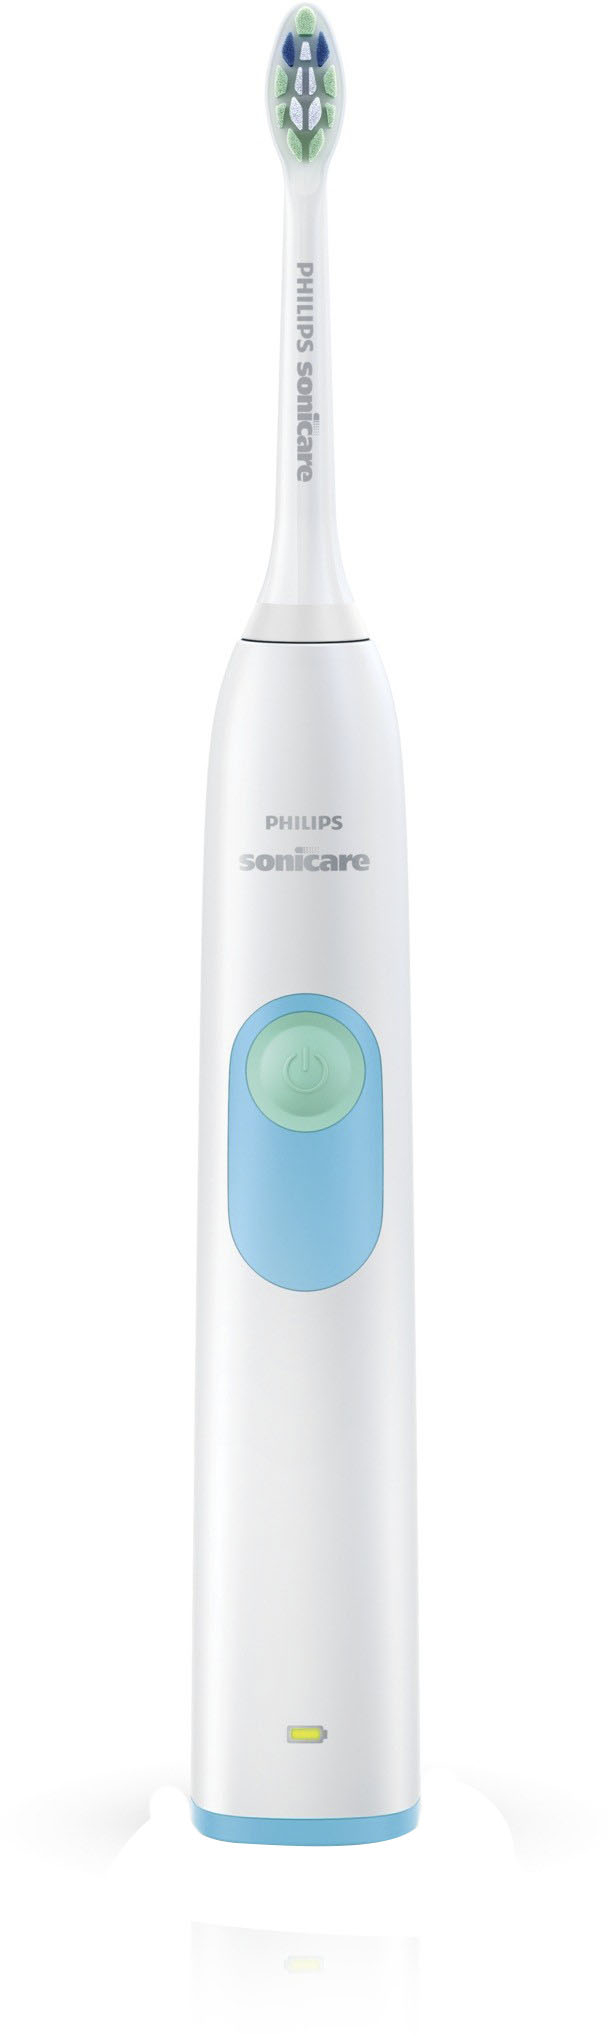 Philips Sonicare 2 Series Plaque Control Electric Rechargeable 